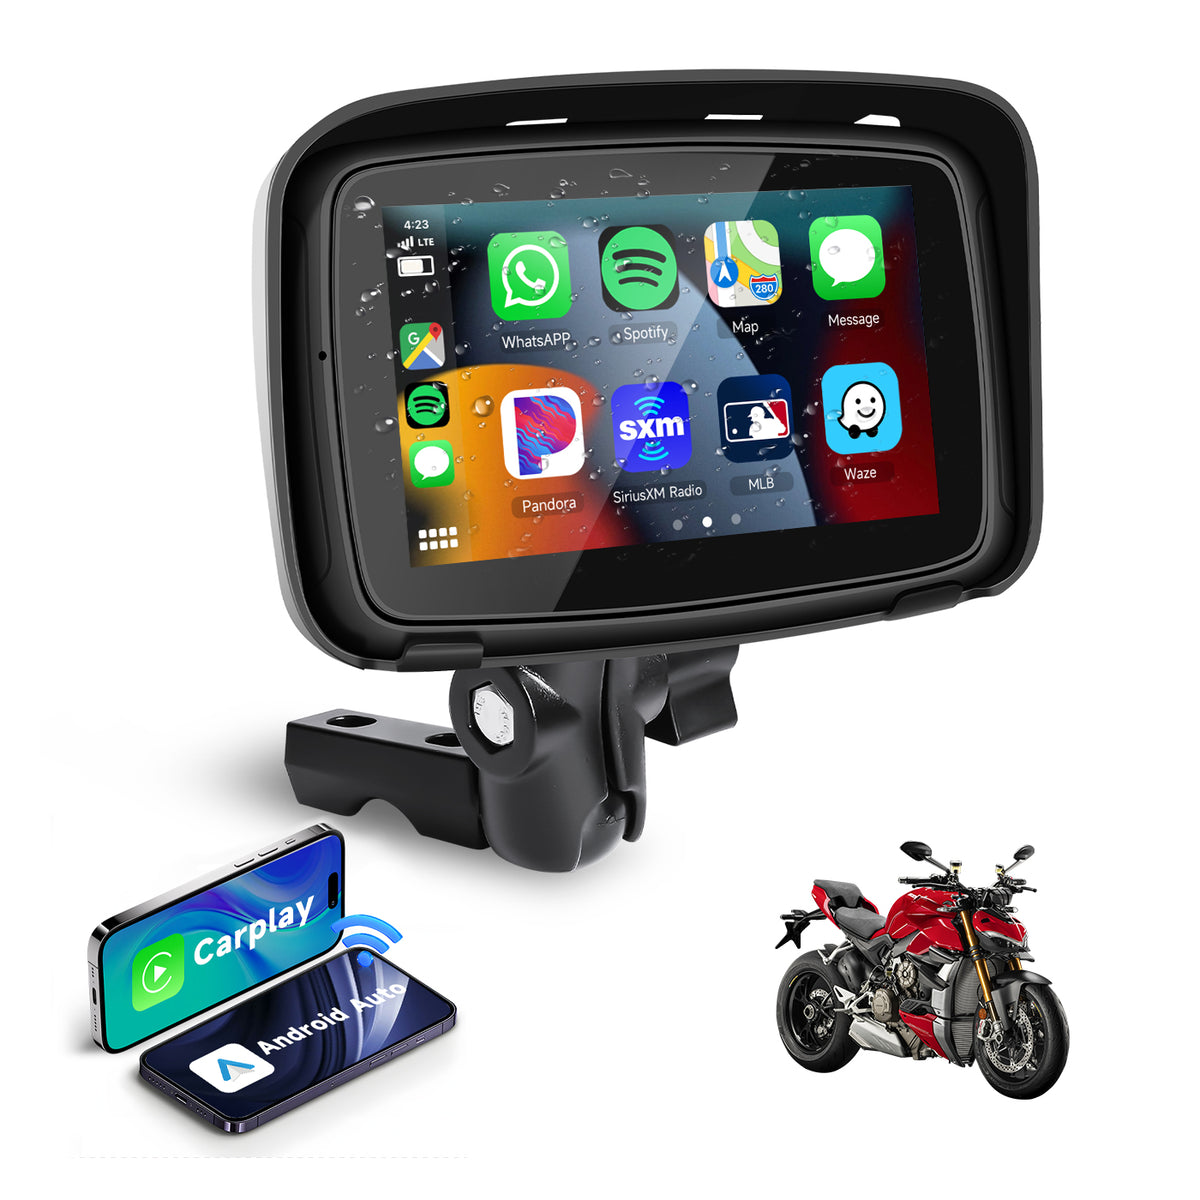 Podofo Portable Wireless CarPlay for Motorcycle Navigator 5 inch IPS Touch Screen Waterproof Andriod Auto Player for Motorcycle Work with Headset 12-24V